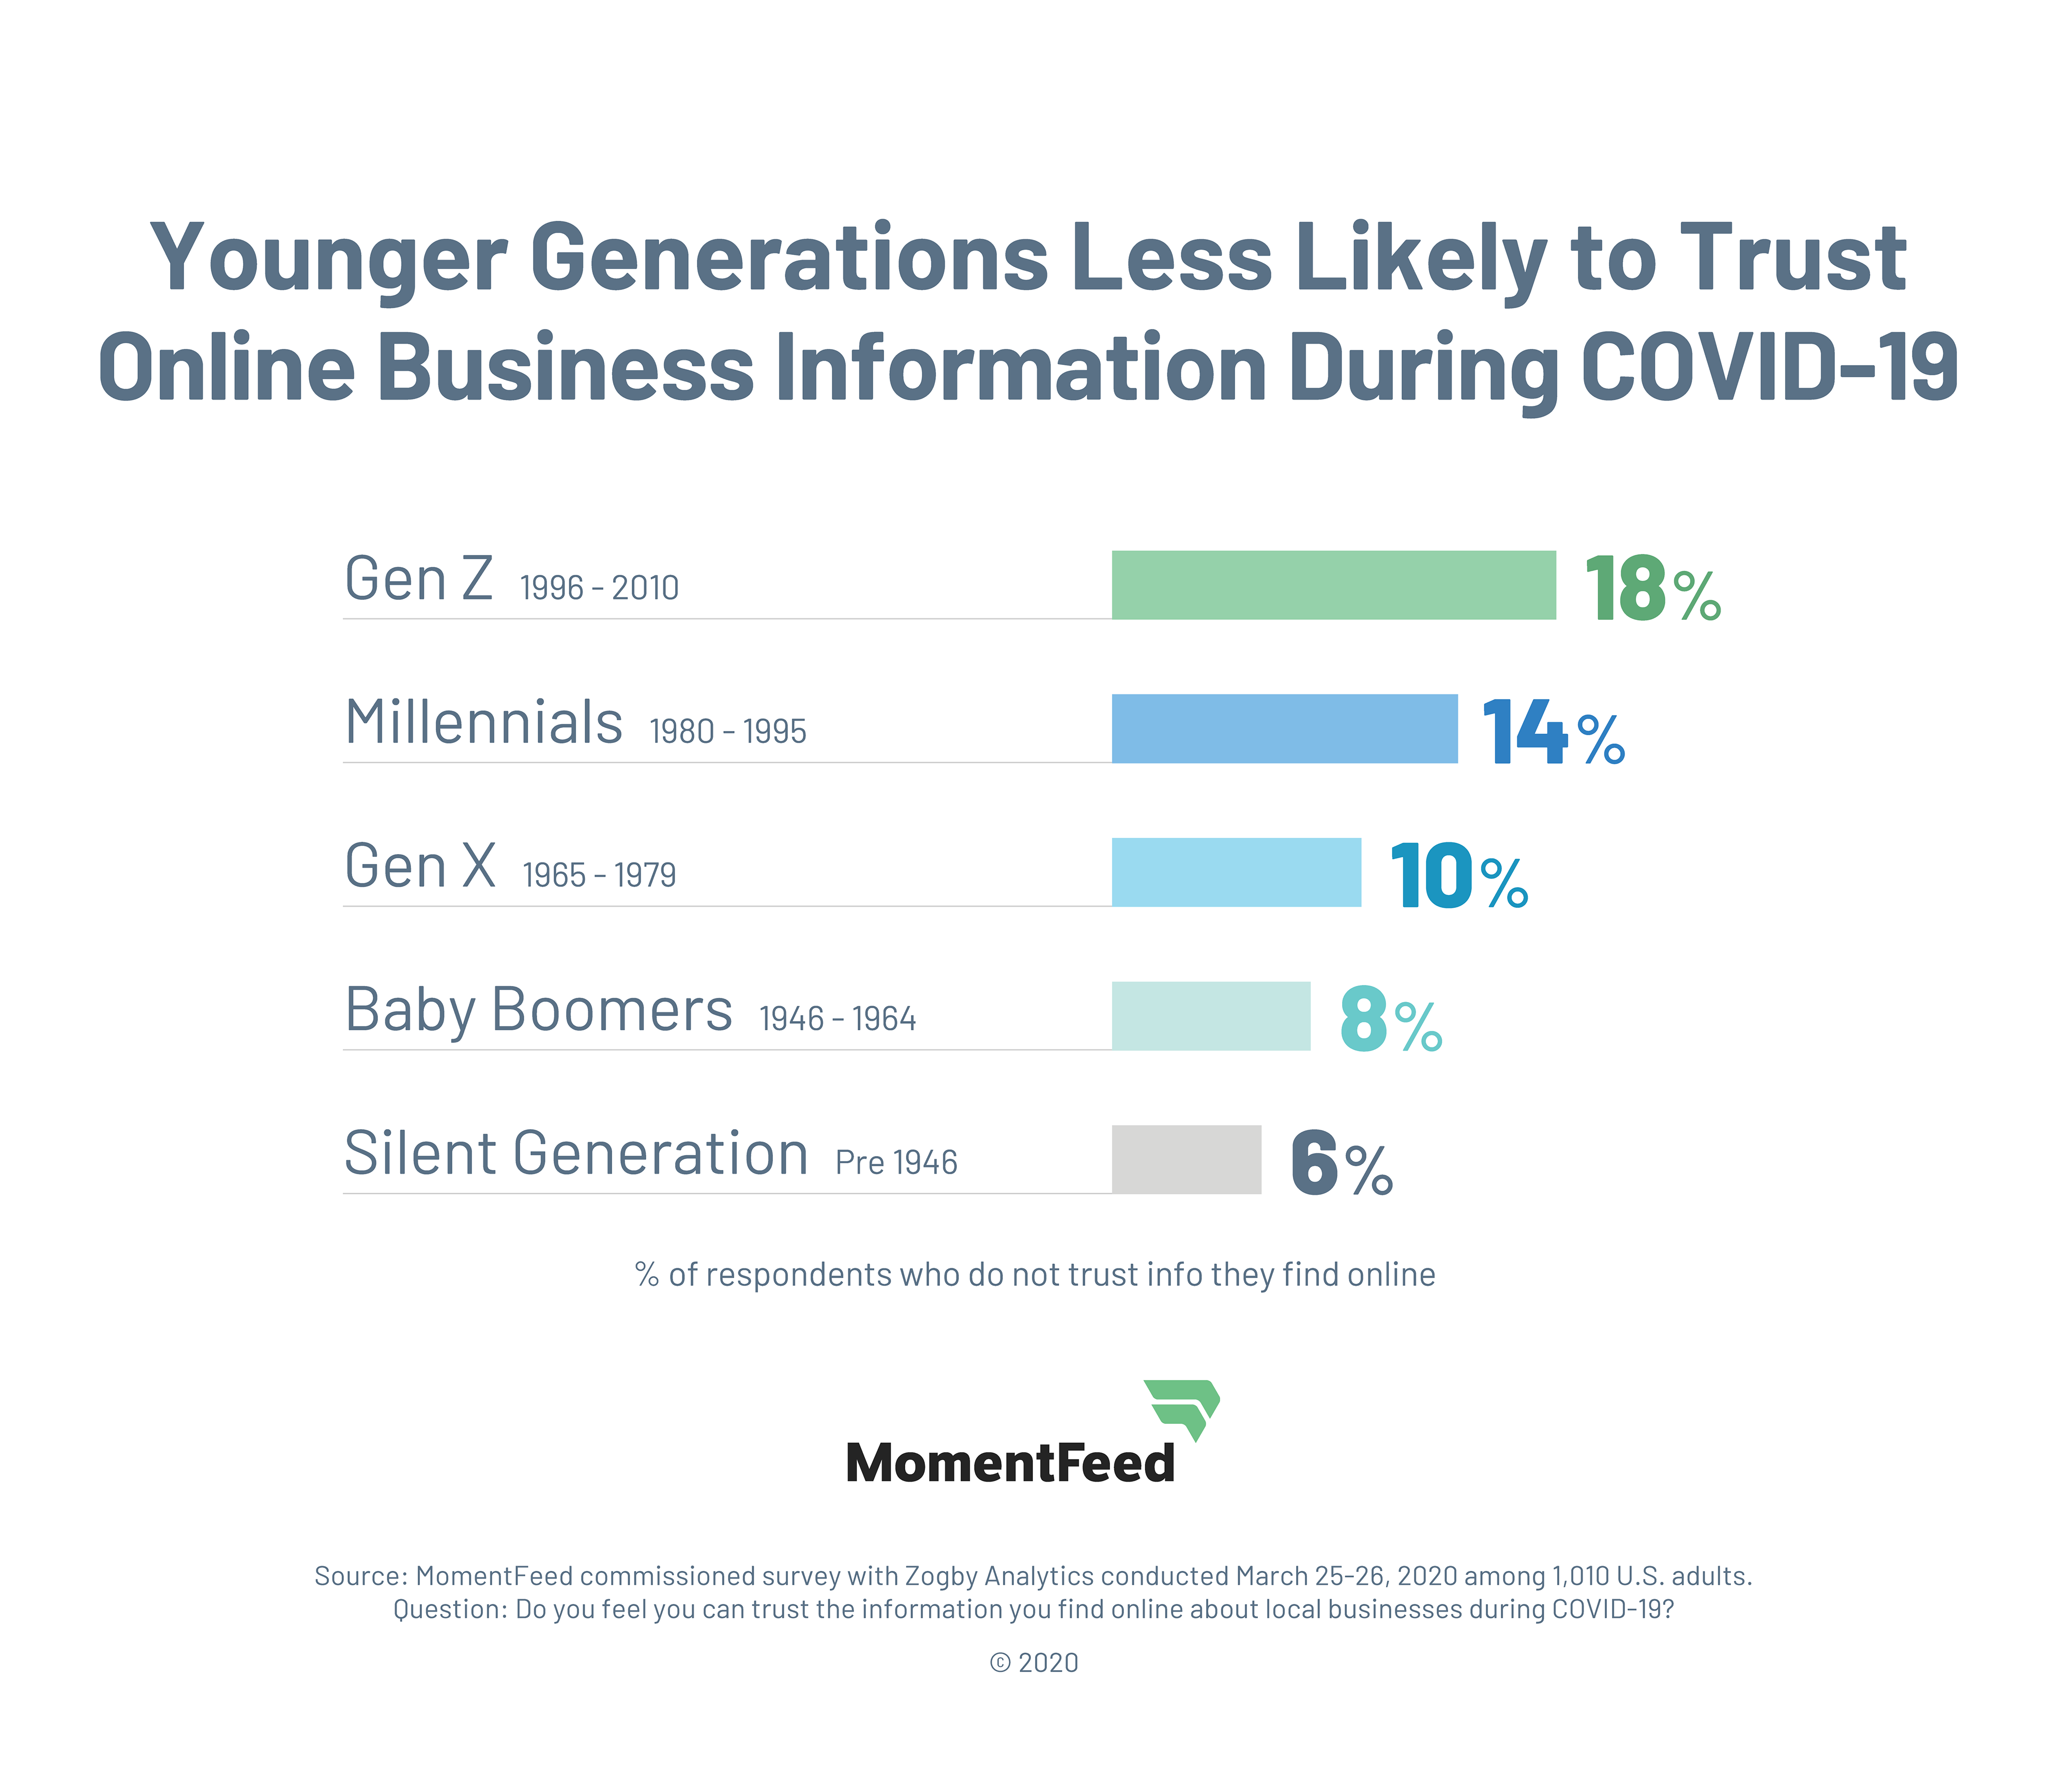 MomentFeed survey finds younger generations less likely to trust online business information during COVID-19